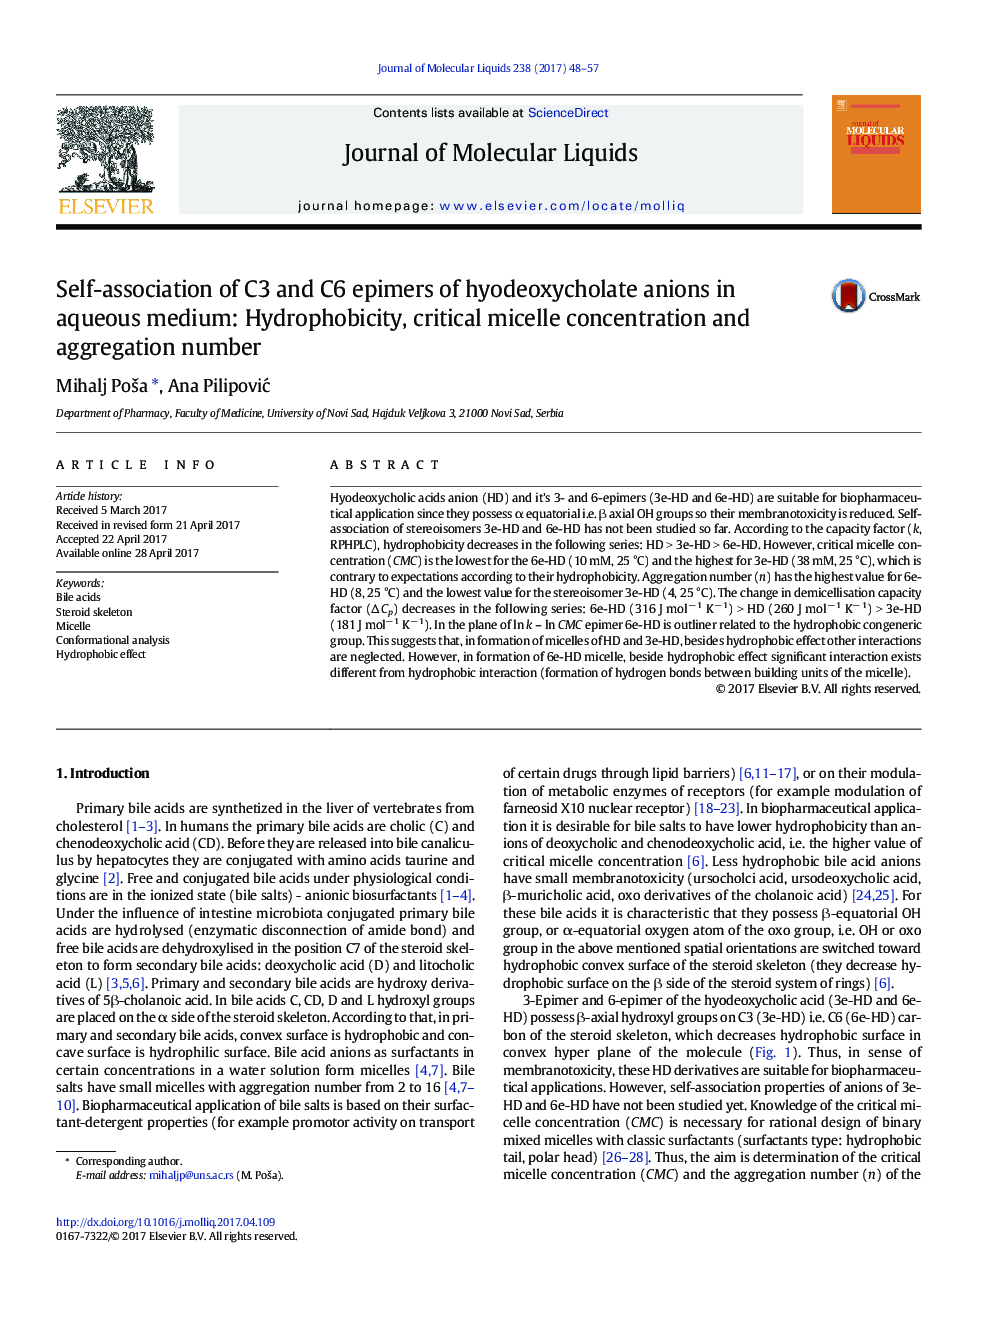 Self-association of C3 and C6 epimers of hyodeoxycholate anions in aqueous medium: Hydrophobicity, critical micelle concentration and aggregation number